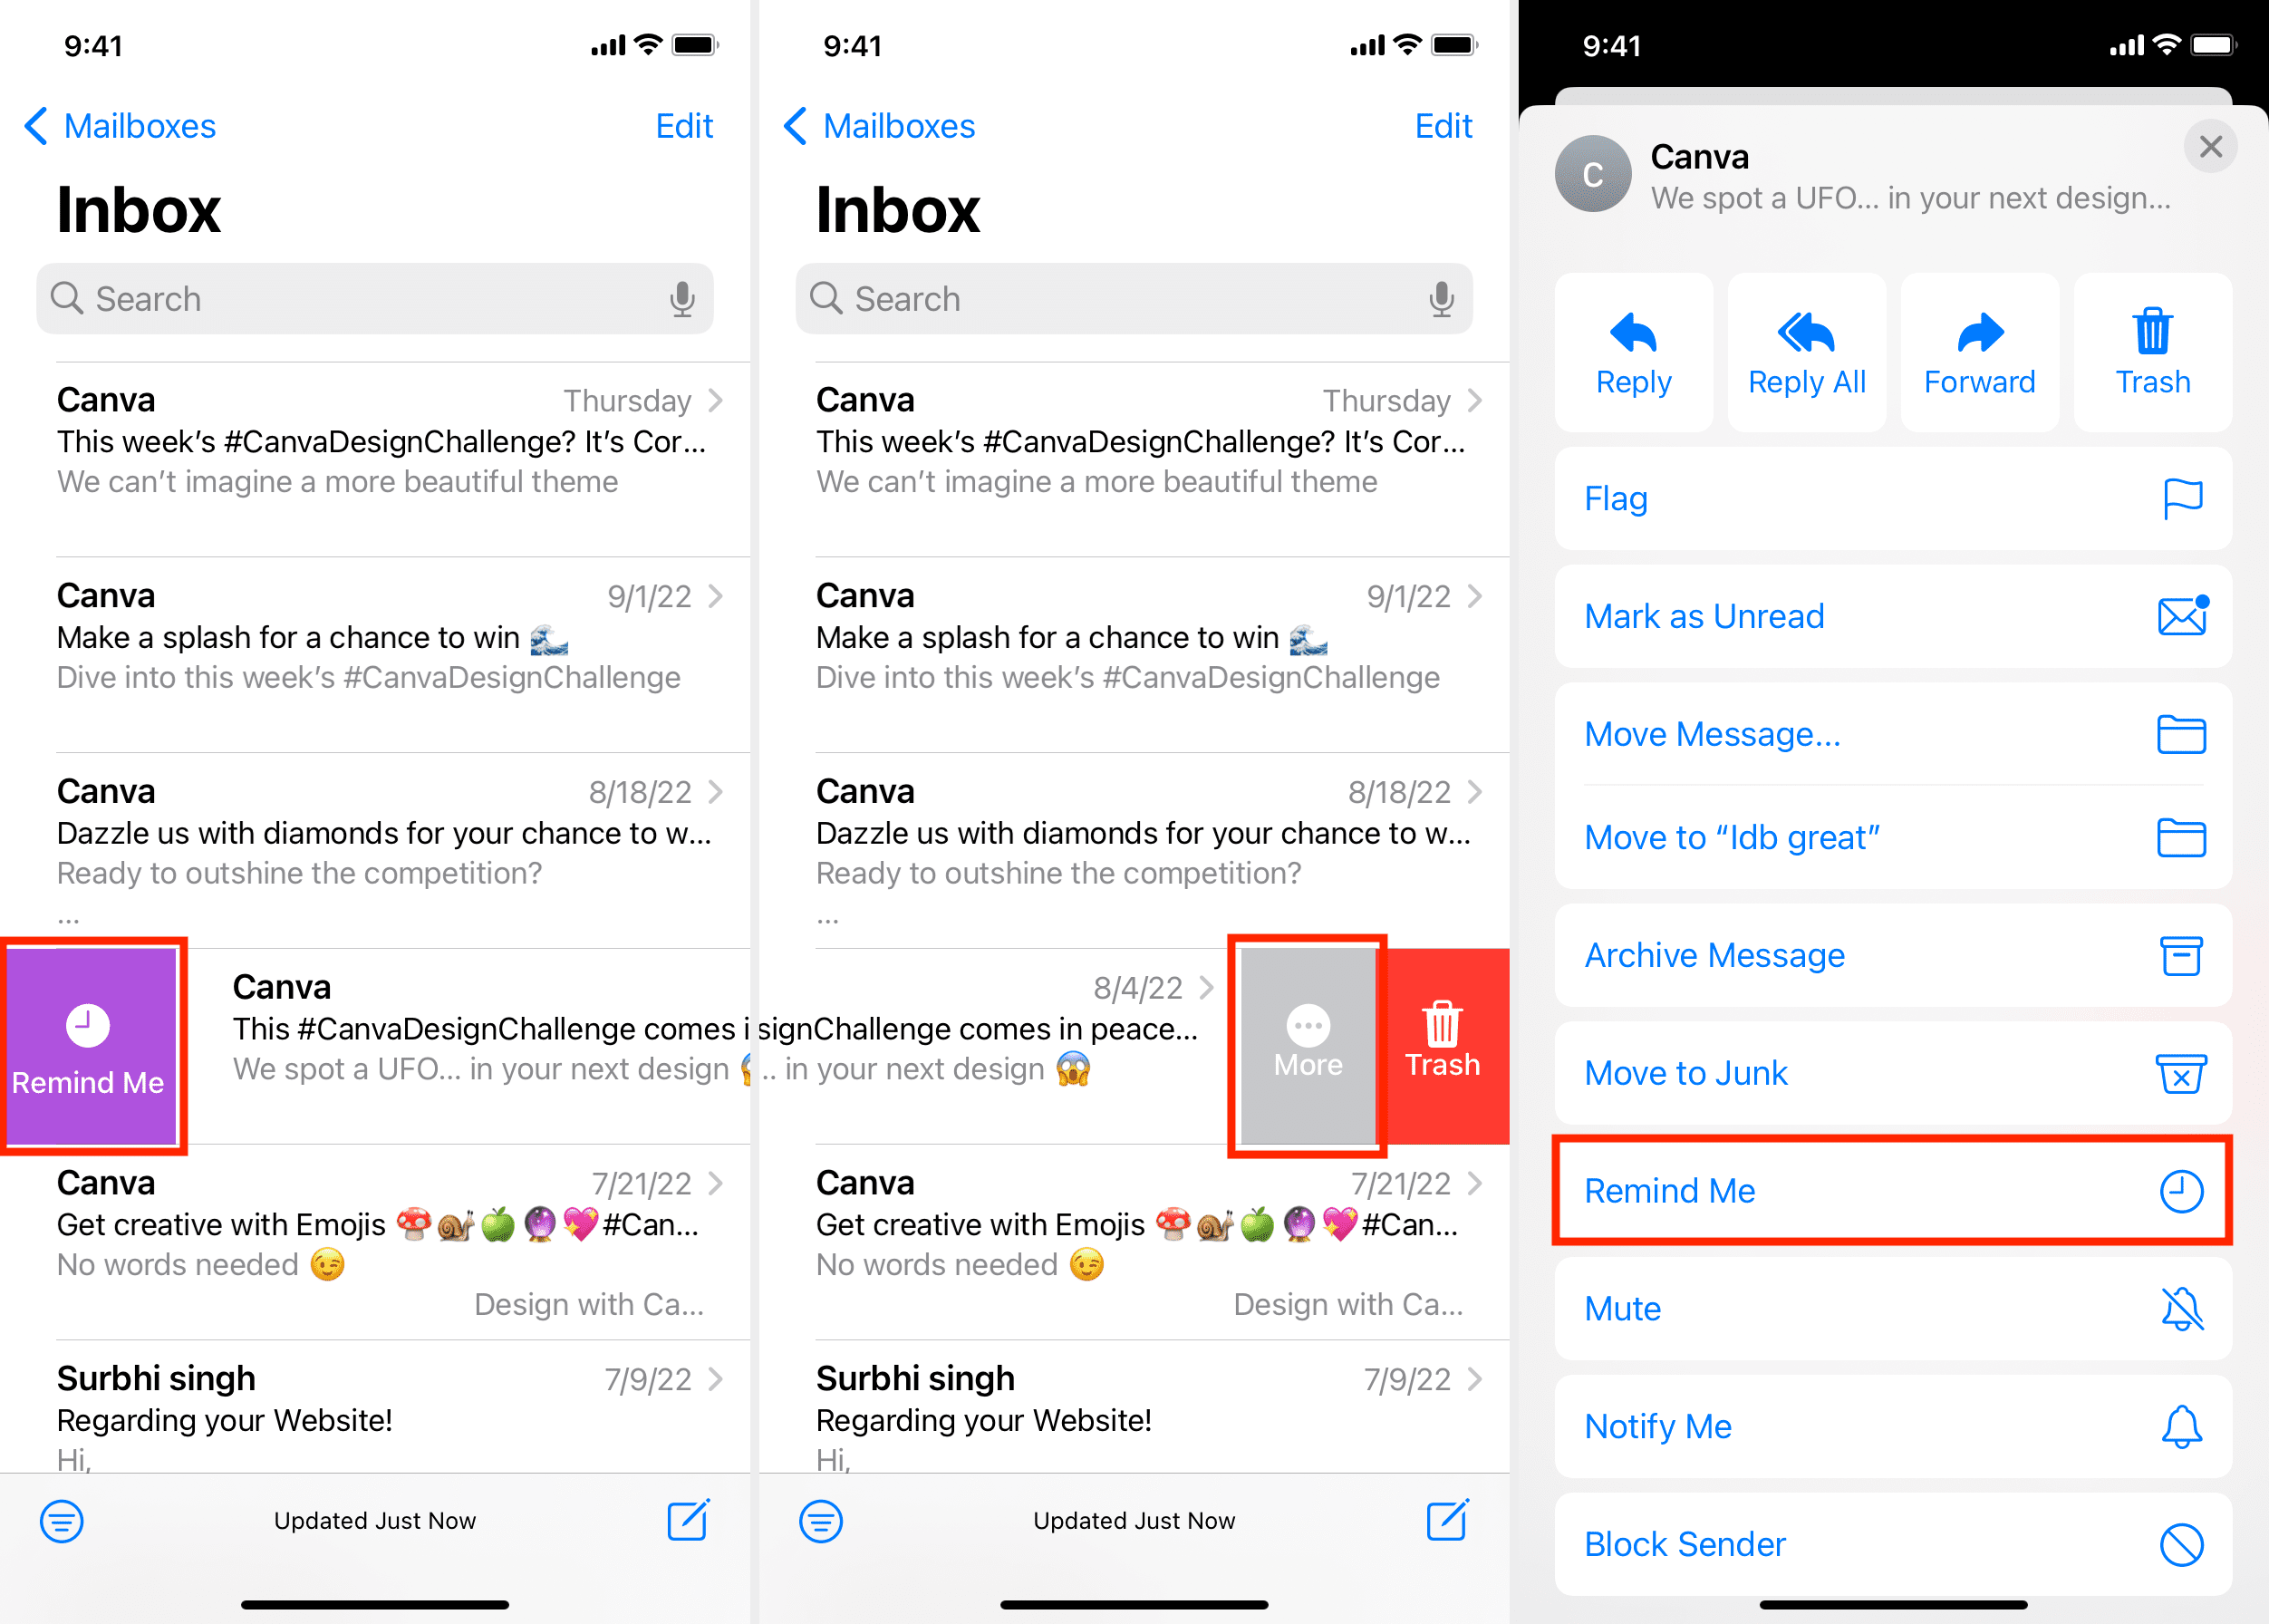 Remind Me option in iPhone Mail app in iOS 16